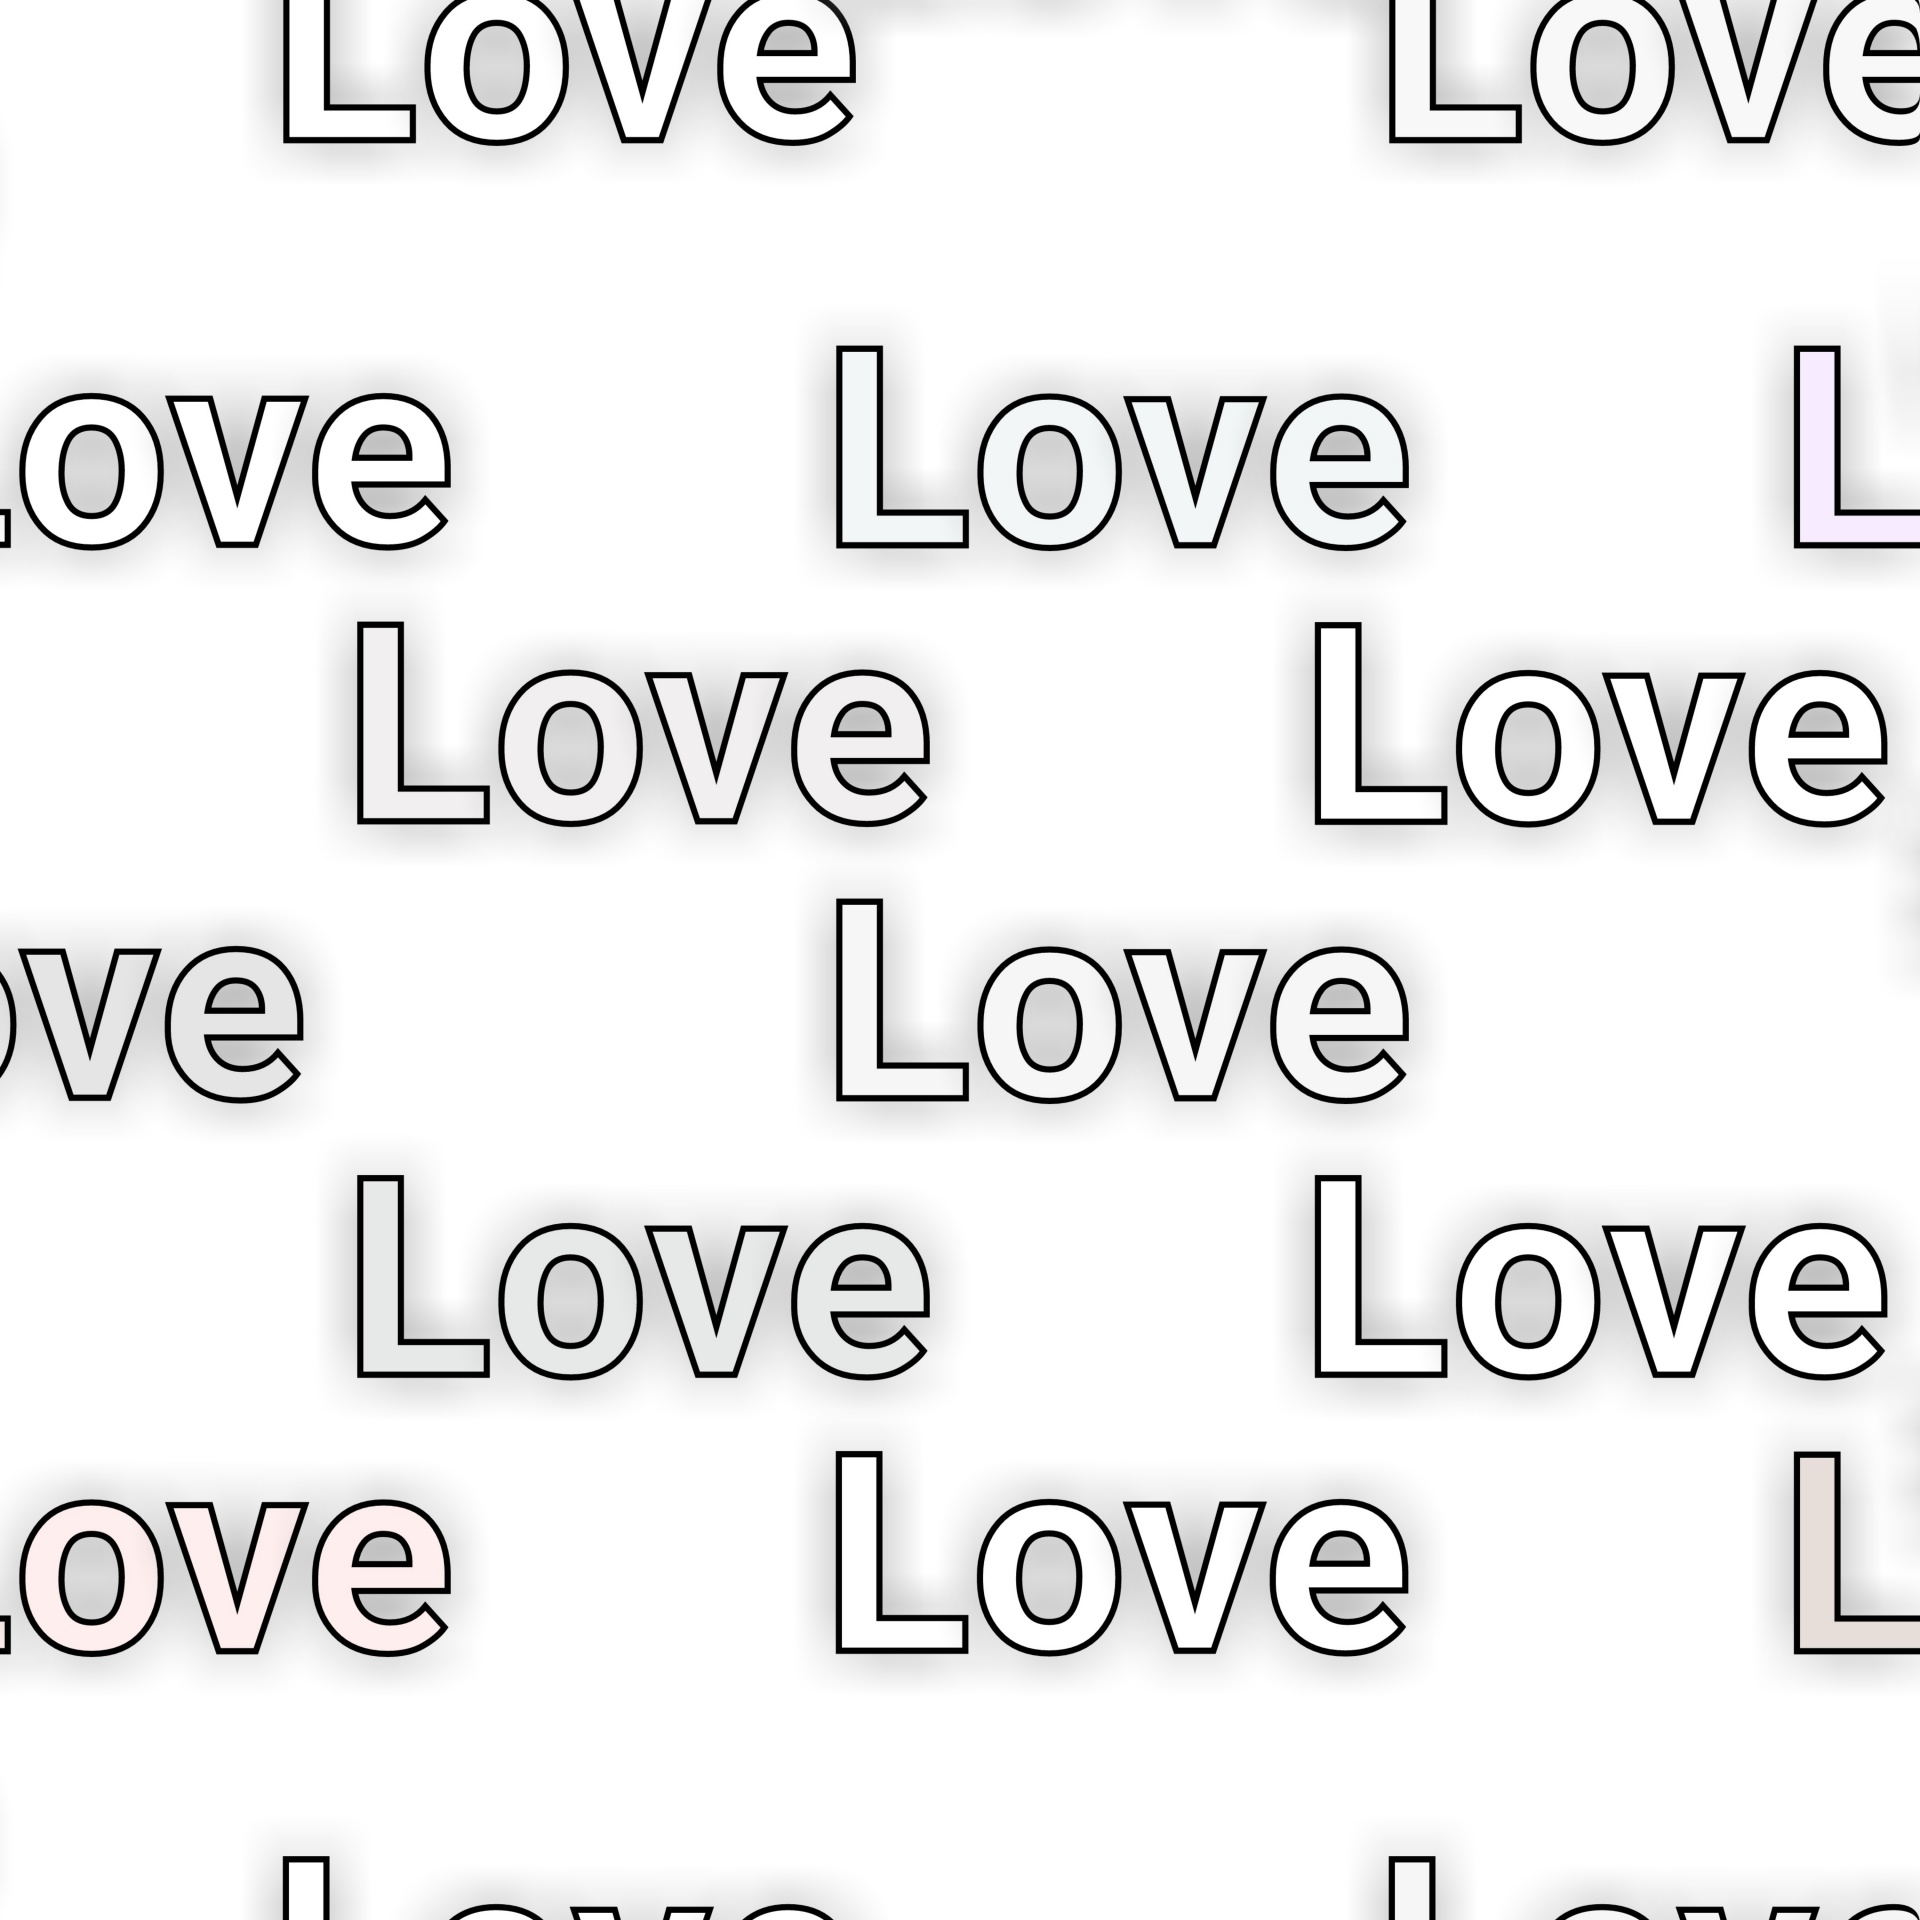 love text word free photo